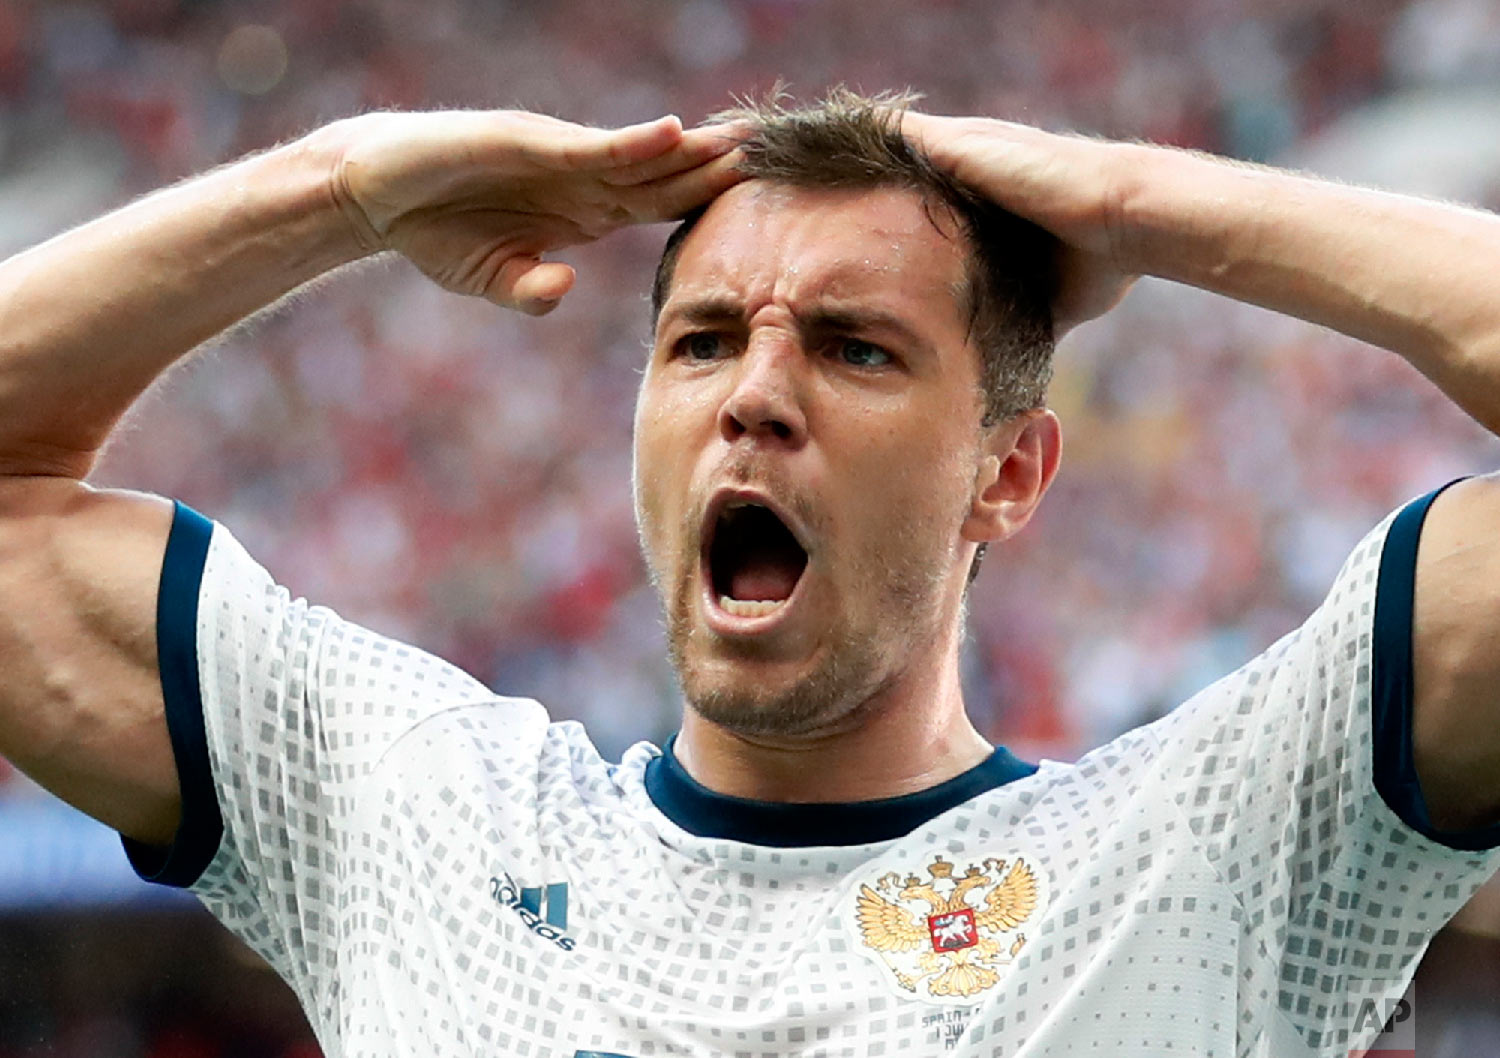  Russia's Artyom Dzyuba salutes when celebrating scoring his side's opening goal during the round of 16 match between Spain and Russia at the 2018 soccer World Cup at the Luzhniki Stadium in Moscow, Russia, Sunday, July 1, 2018. (AP Photo/Antonio Cal